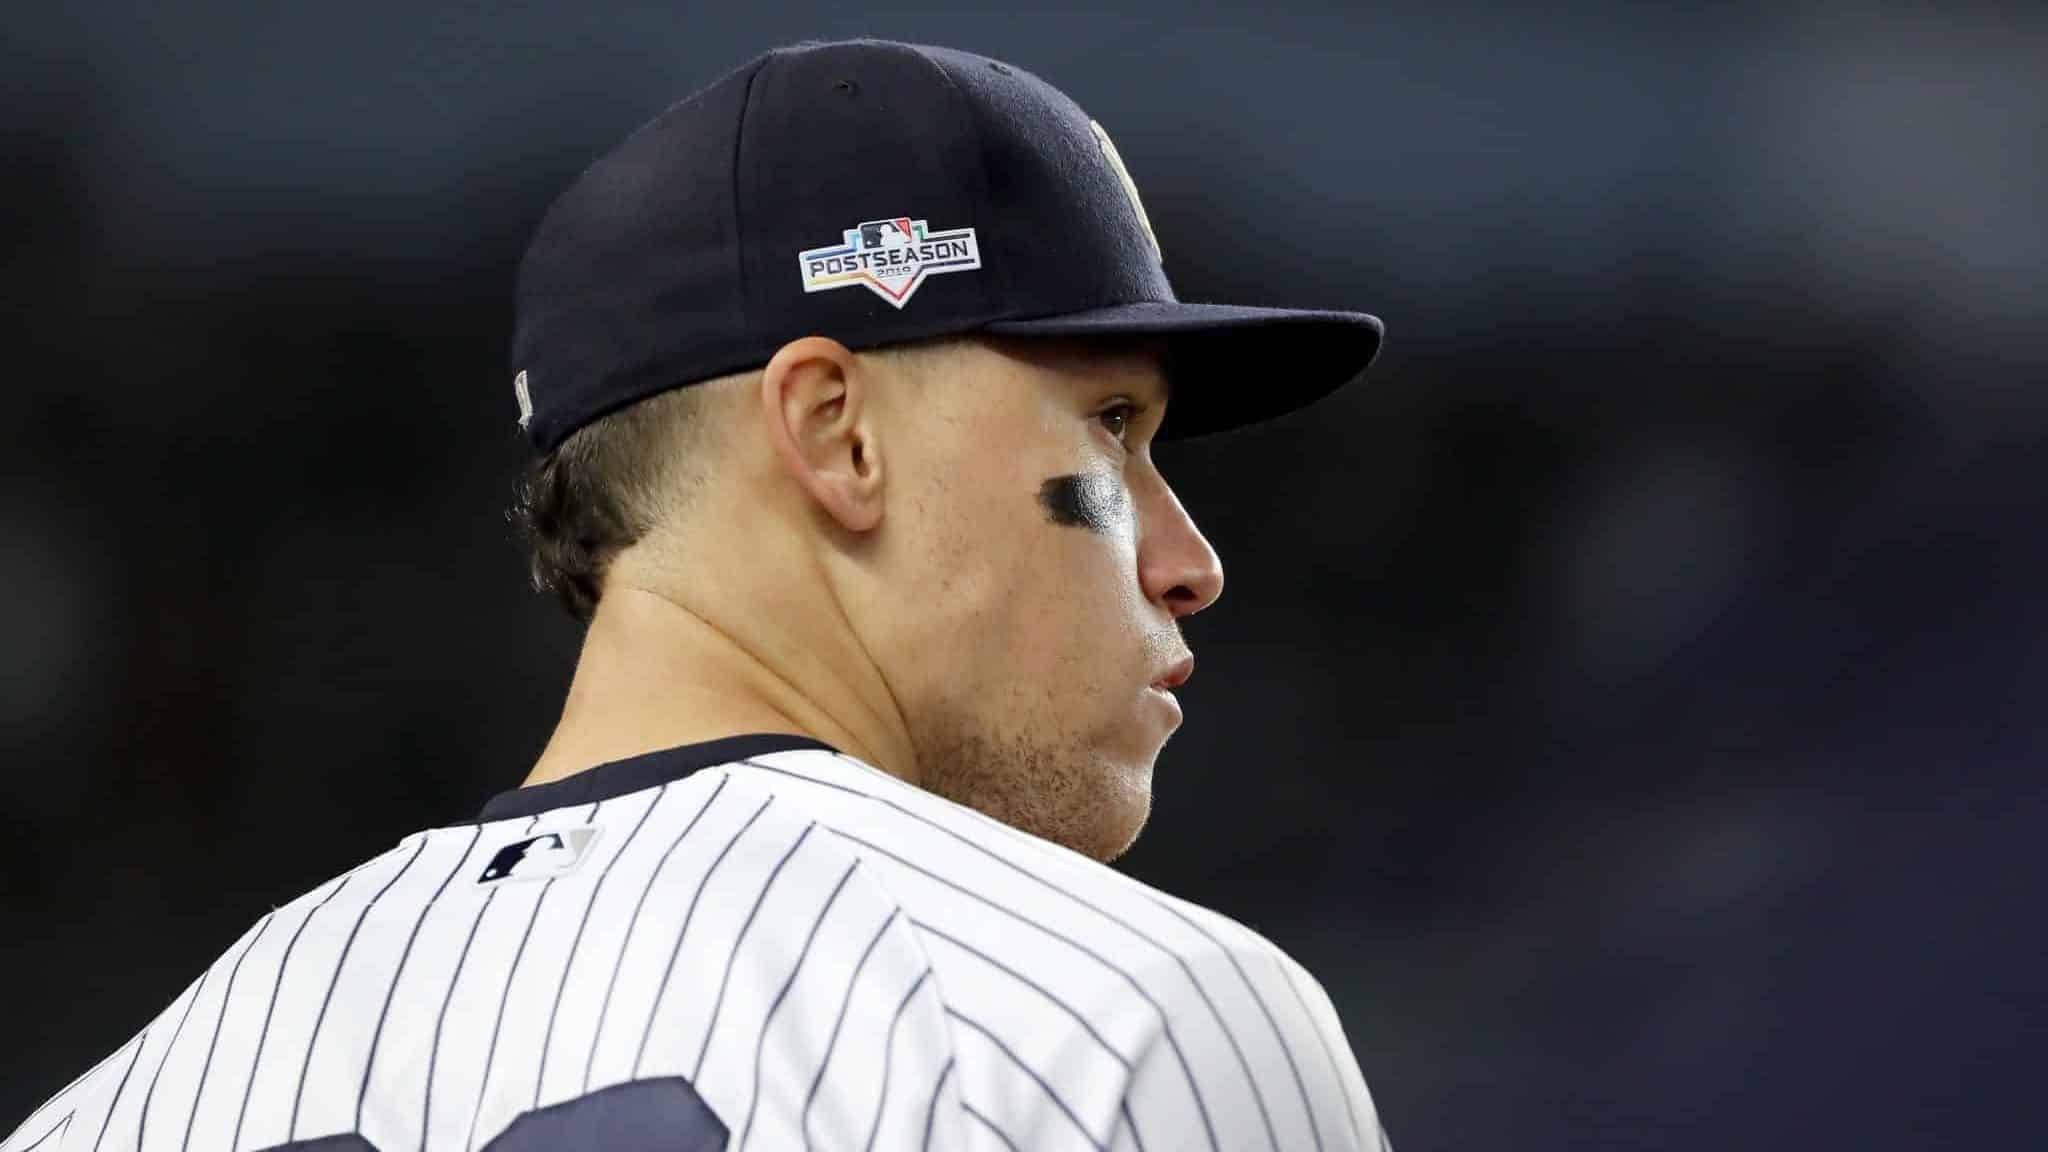 NEW YORK, NEW YORK - OCTOBER 18: Aaron Judge #99 of the New York Yankees looks on against the Houston Astros during the eighth inning in game five of the American League Championship Series at Yankee Stadium on October 18, 2019 in New York City.